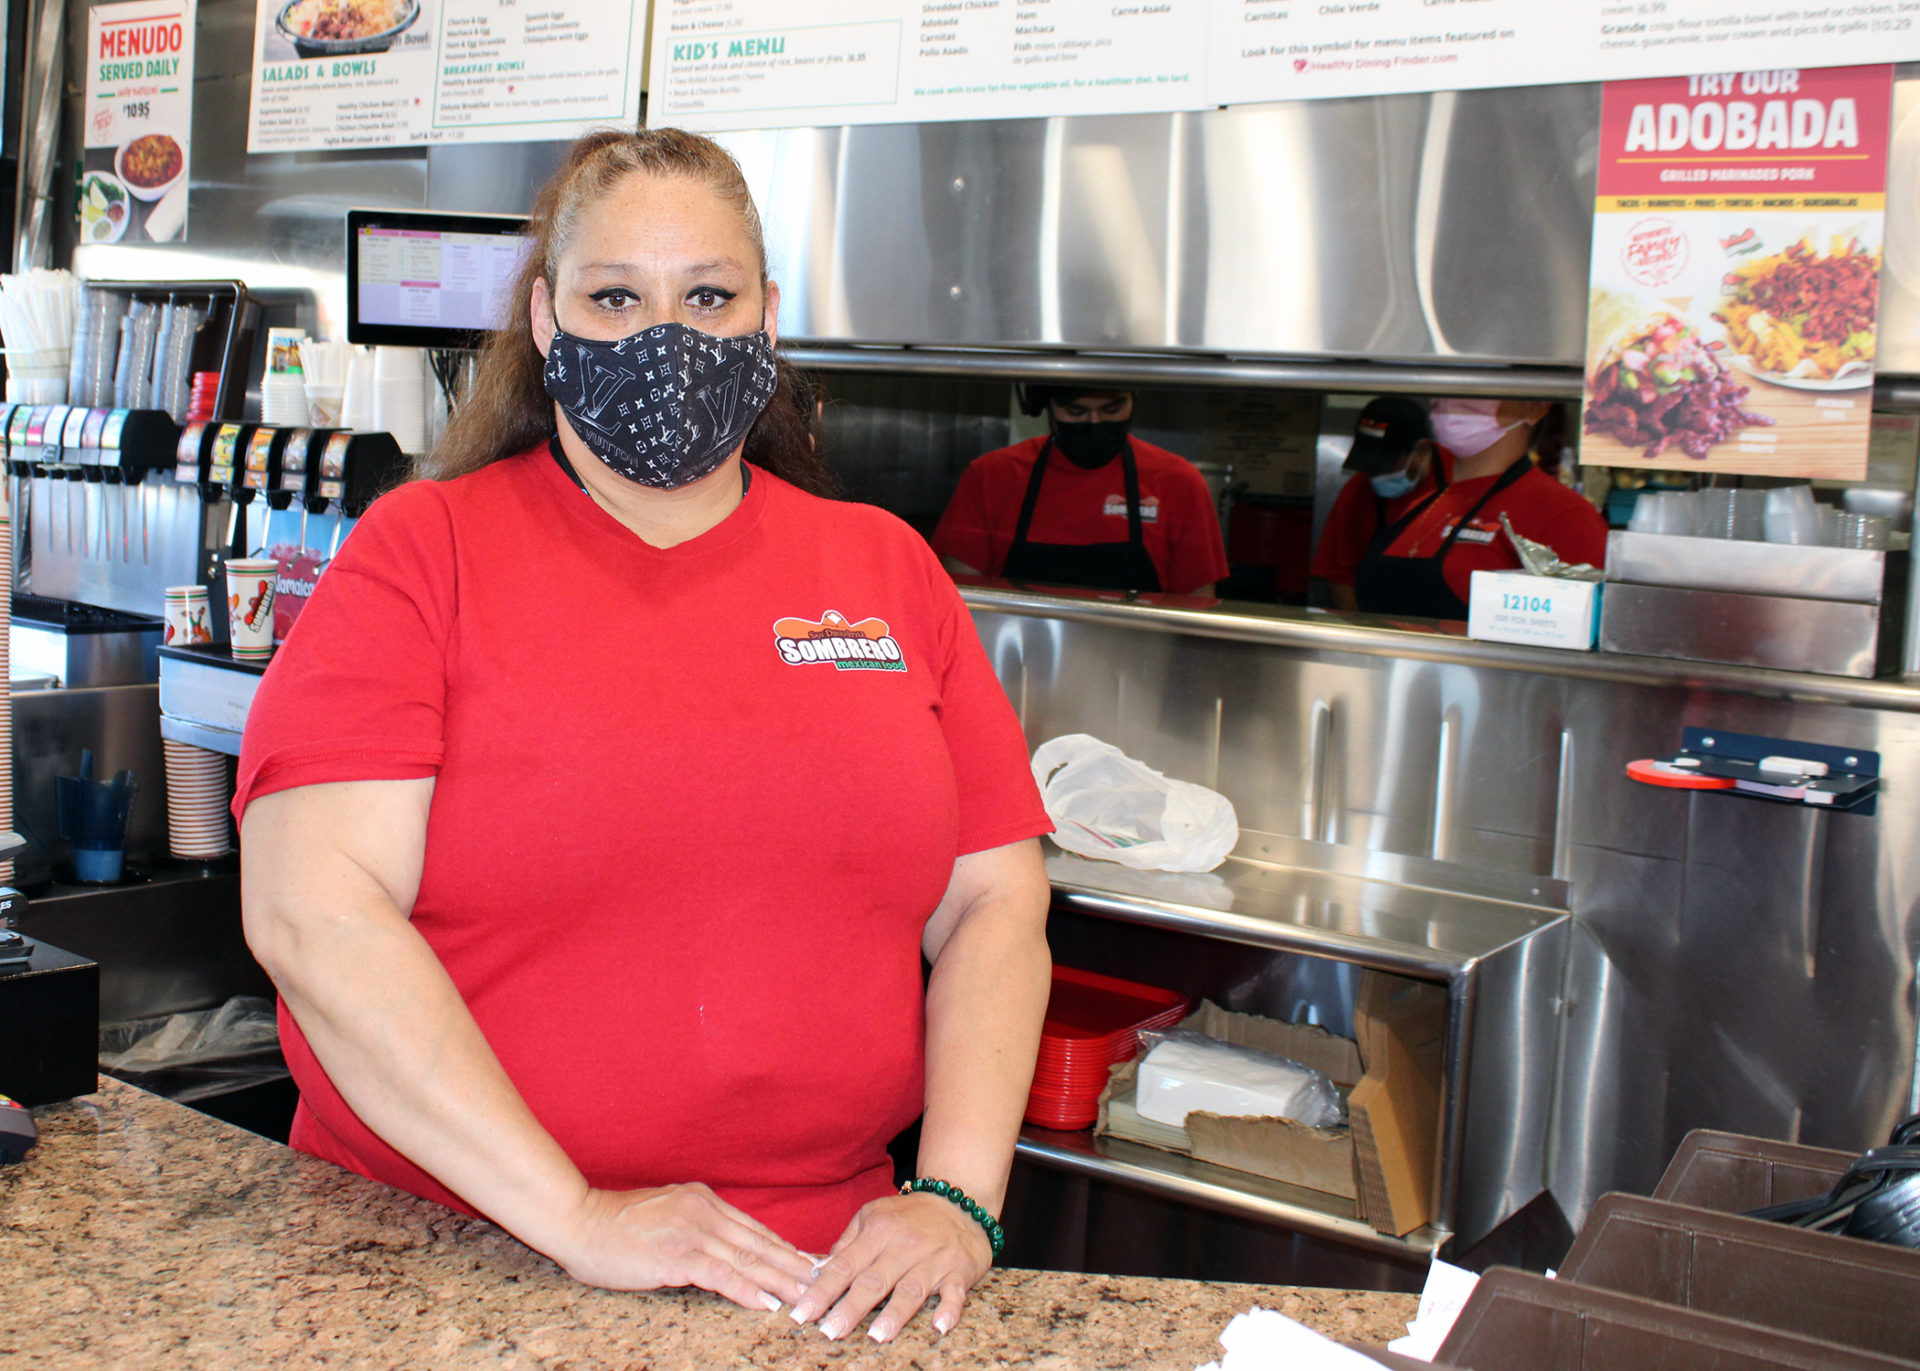 Angela Carapia stands at restaurant counter